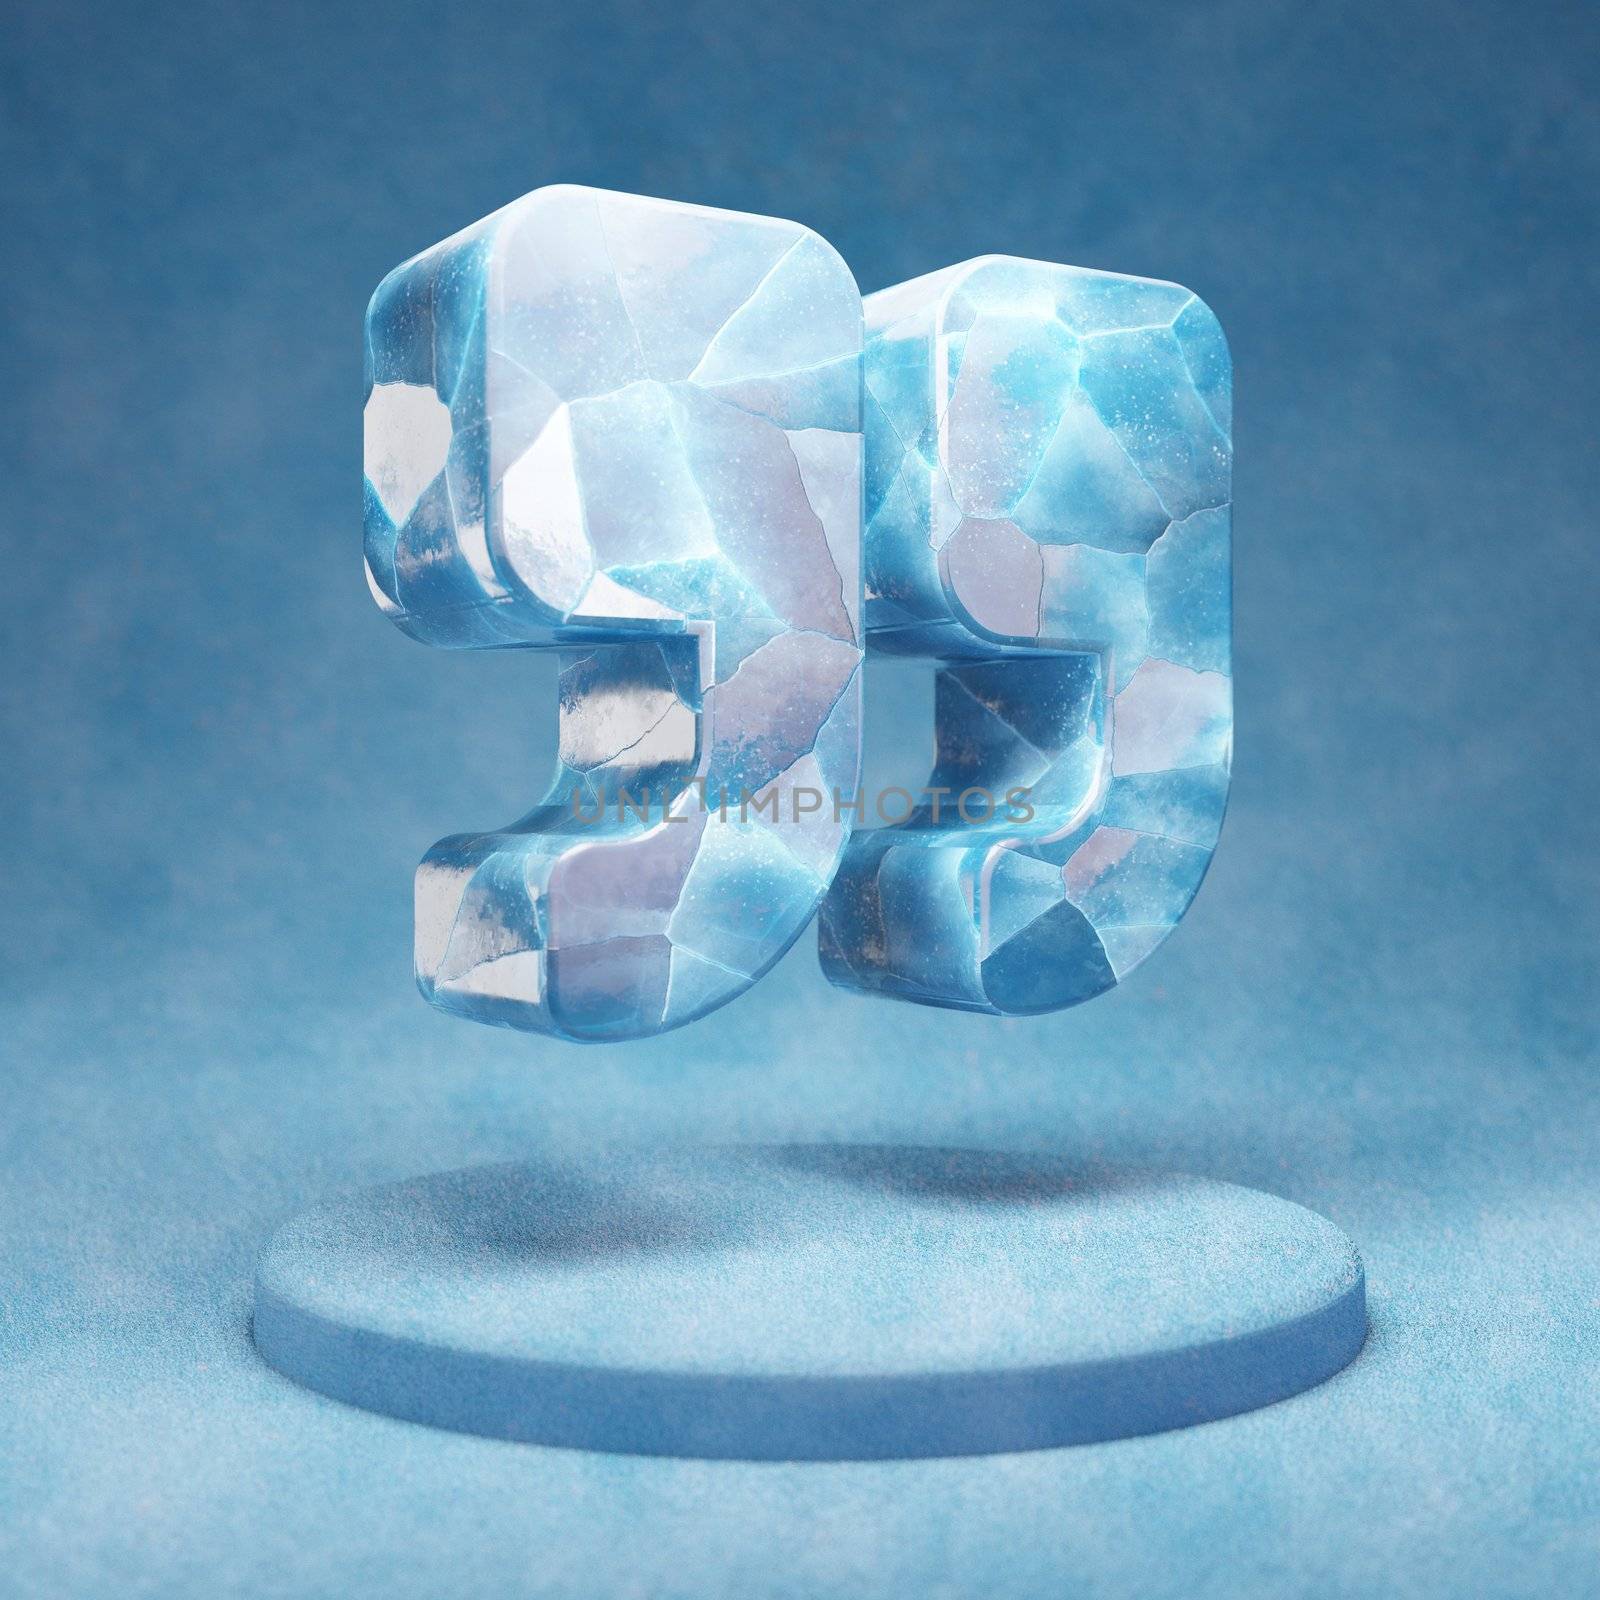 Quote Right icon. Cracked blue Ice Quote Right symbol on blue snow podium. Social Media Icon for website, presentation, design template element. 3D render.